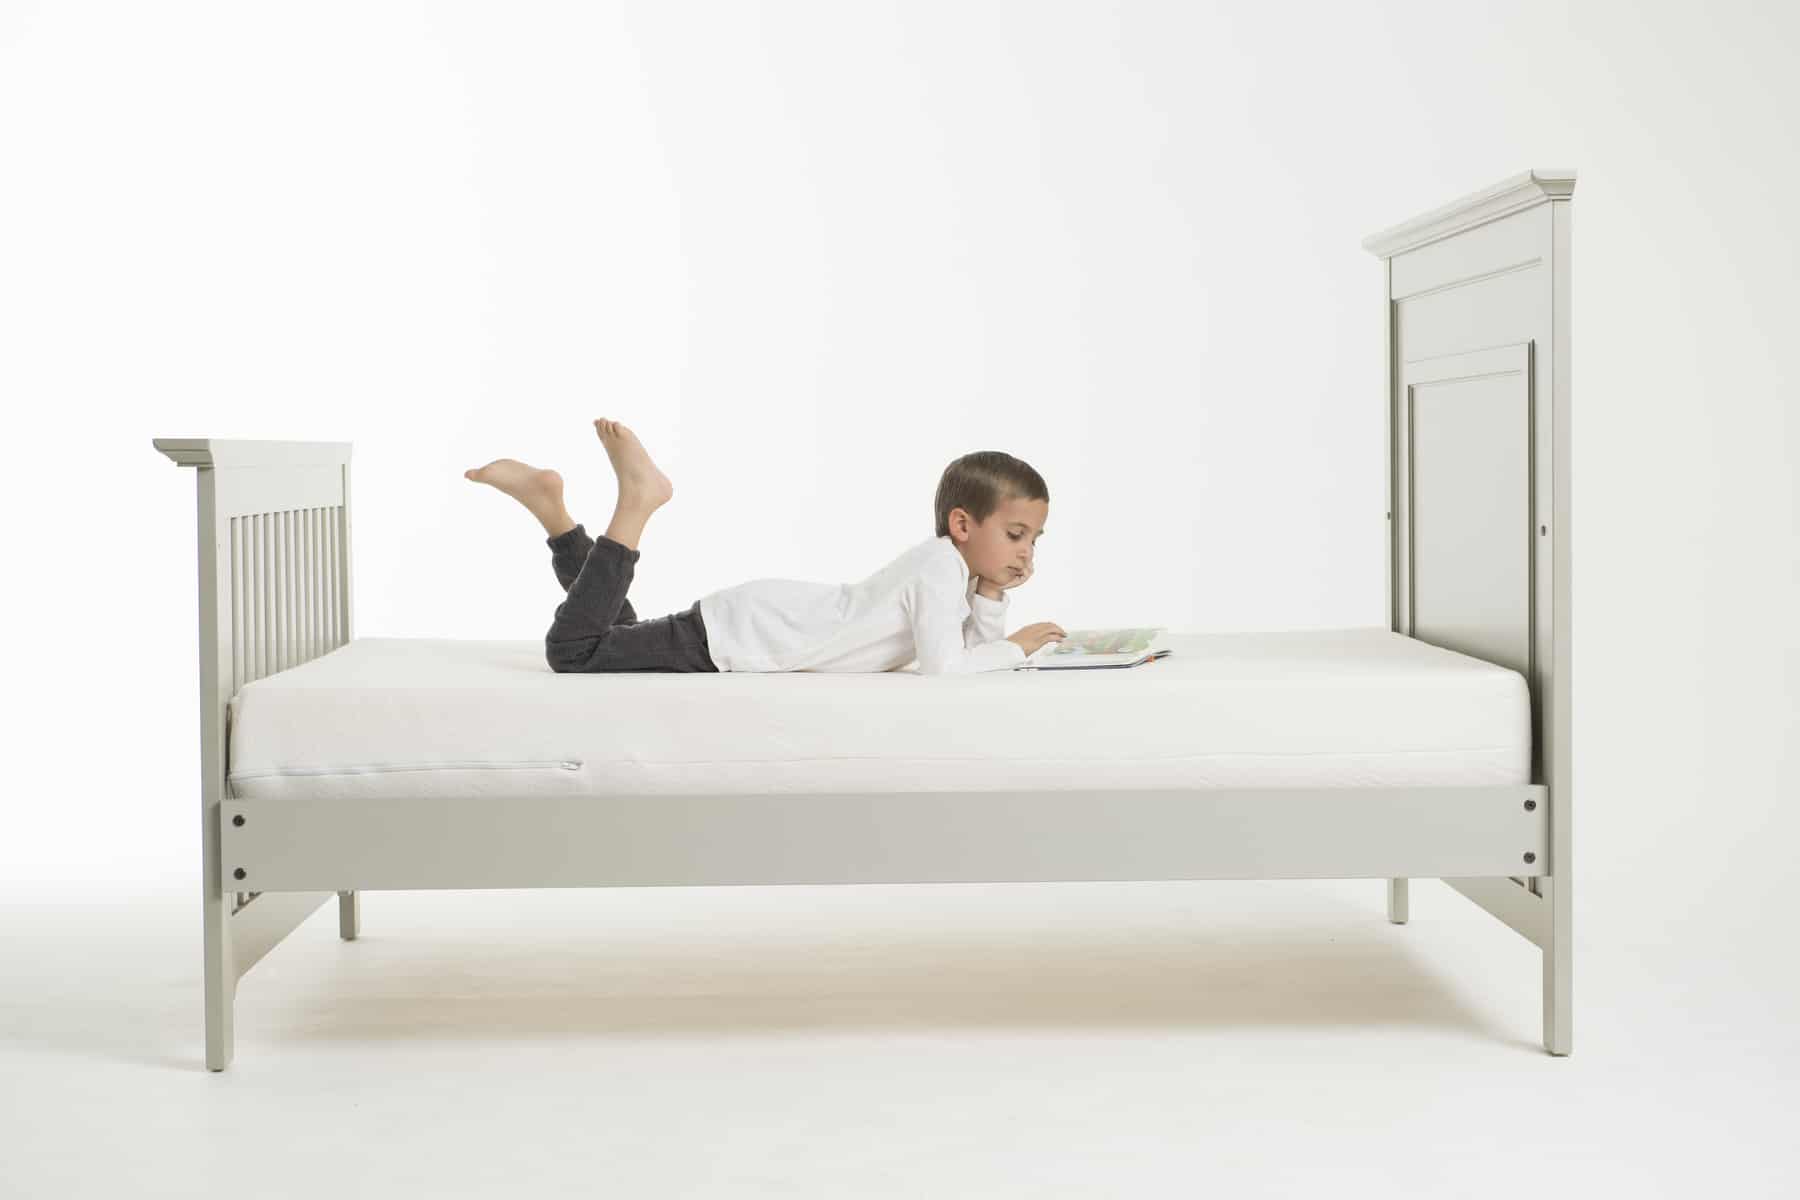 5 Reasons Why Mattress Foam And Vocs Are Harmful To Children